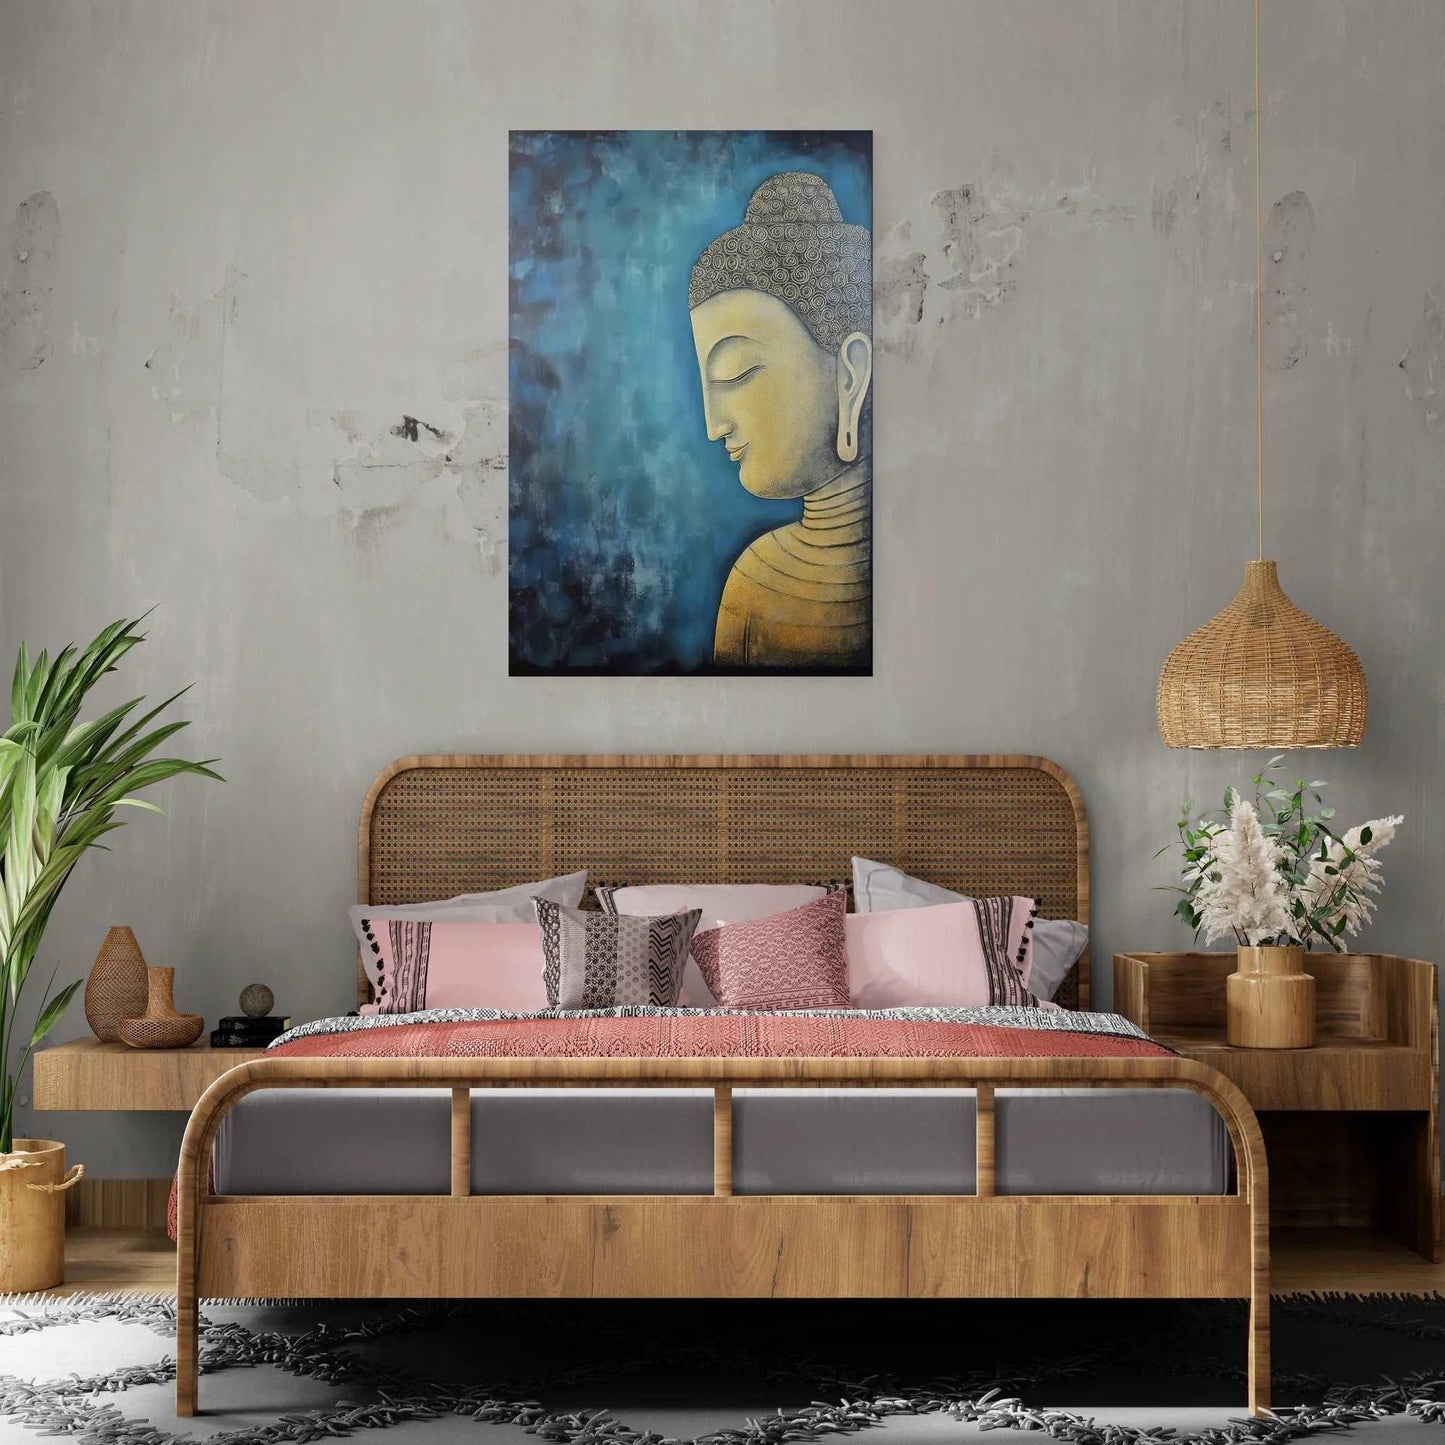 Bedroom with a wicker headboard and pink bedding, complemented by a serene Buddha painting on a distressed wall.